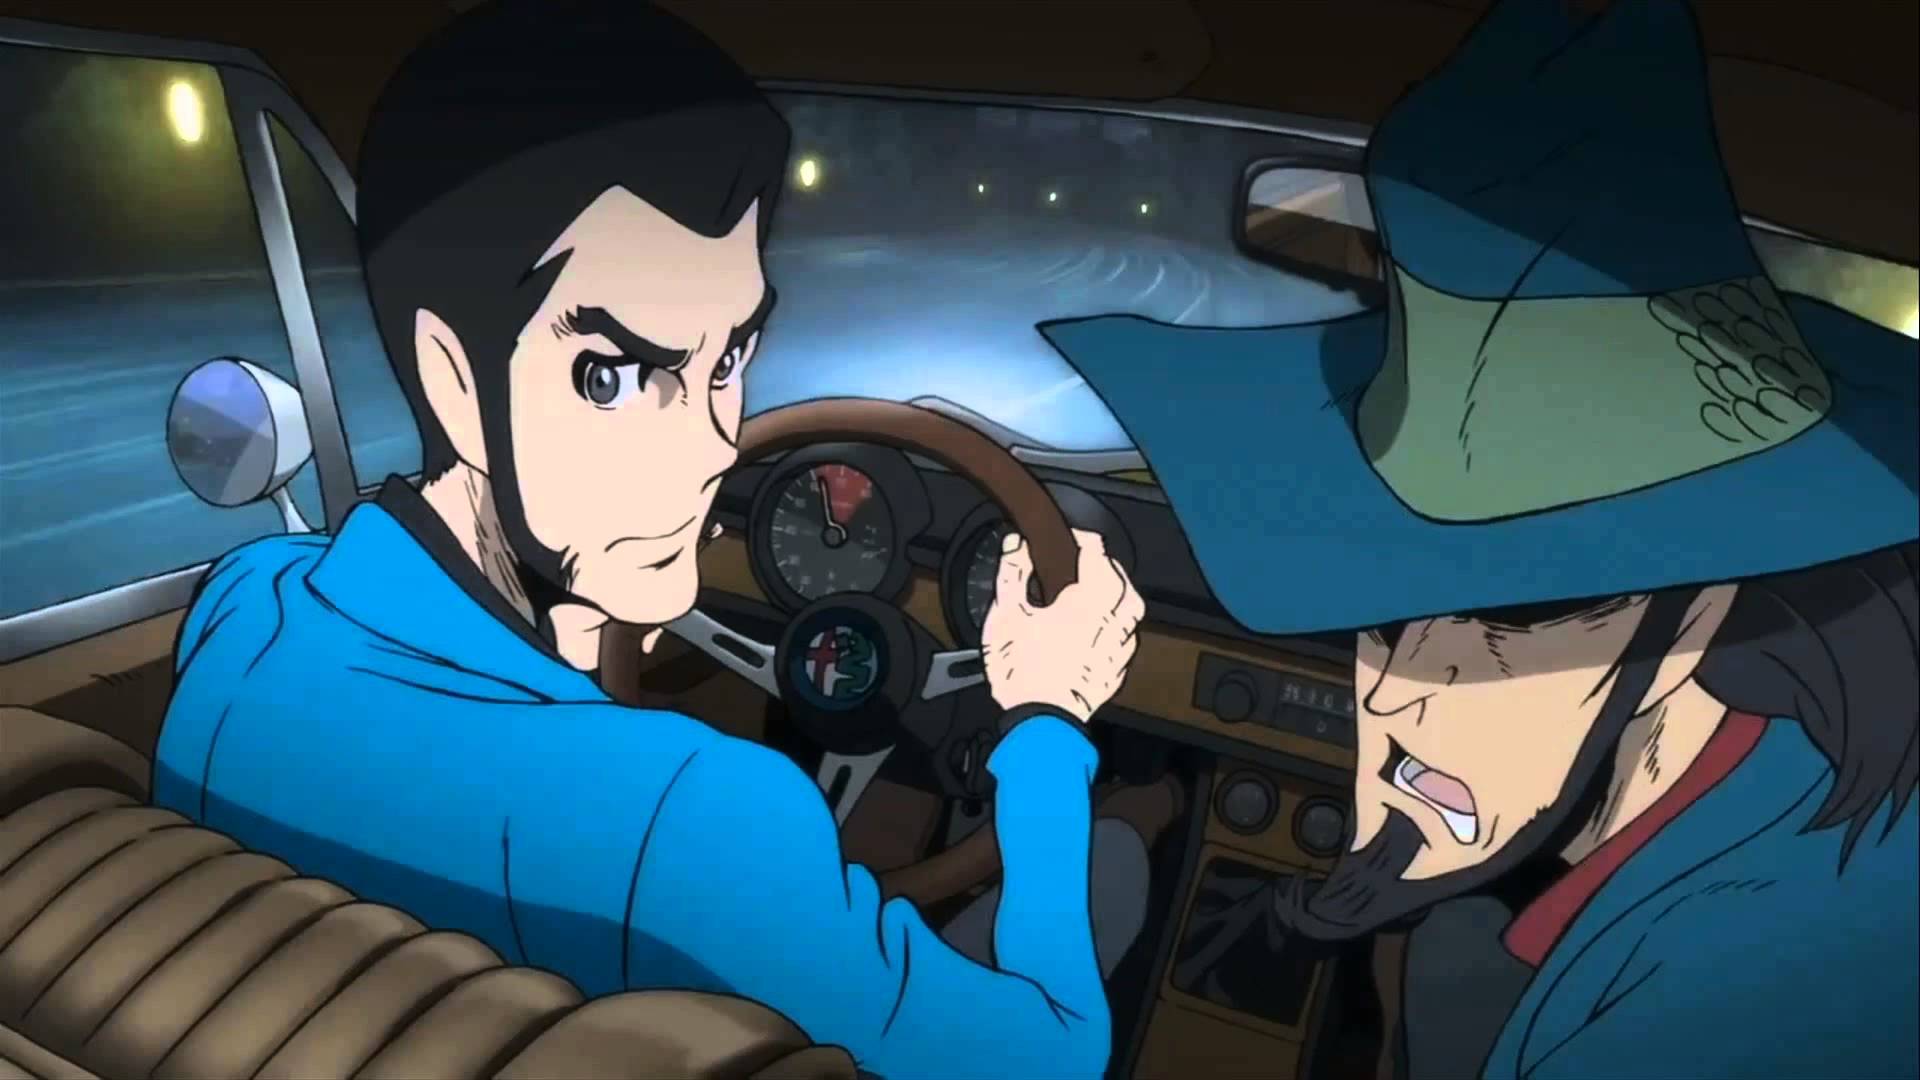 Lupin The 3rd Wallpaper